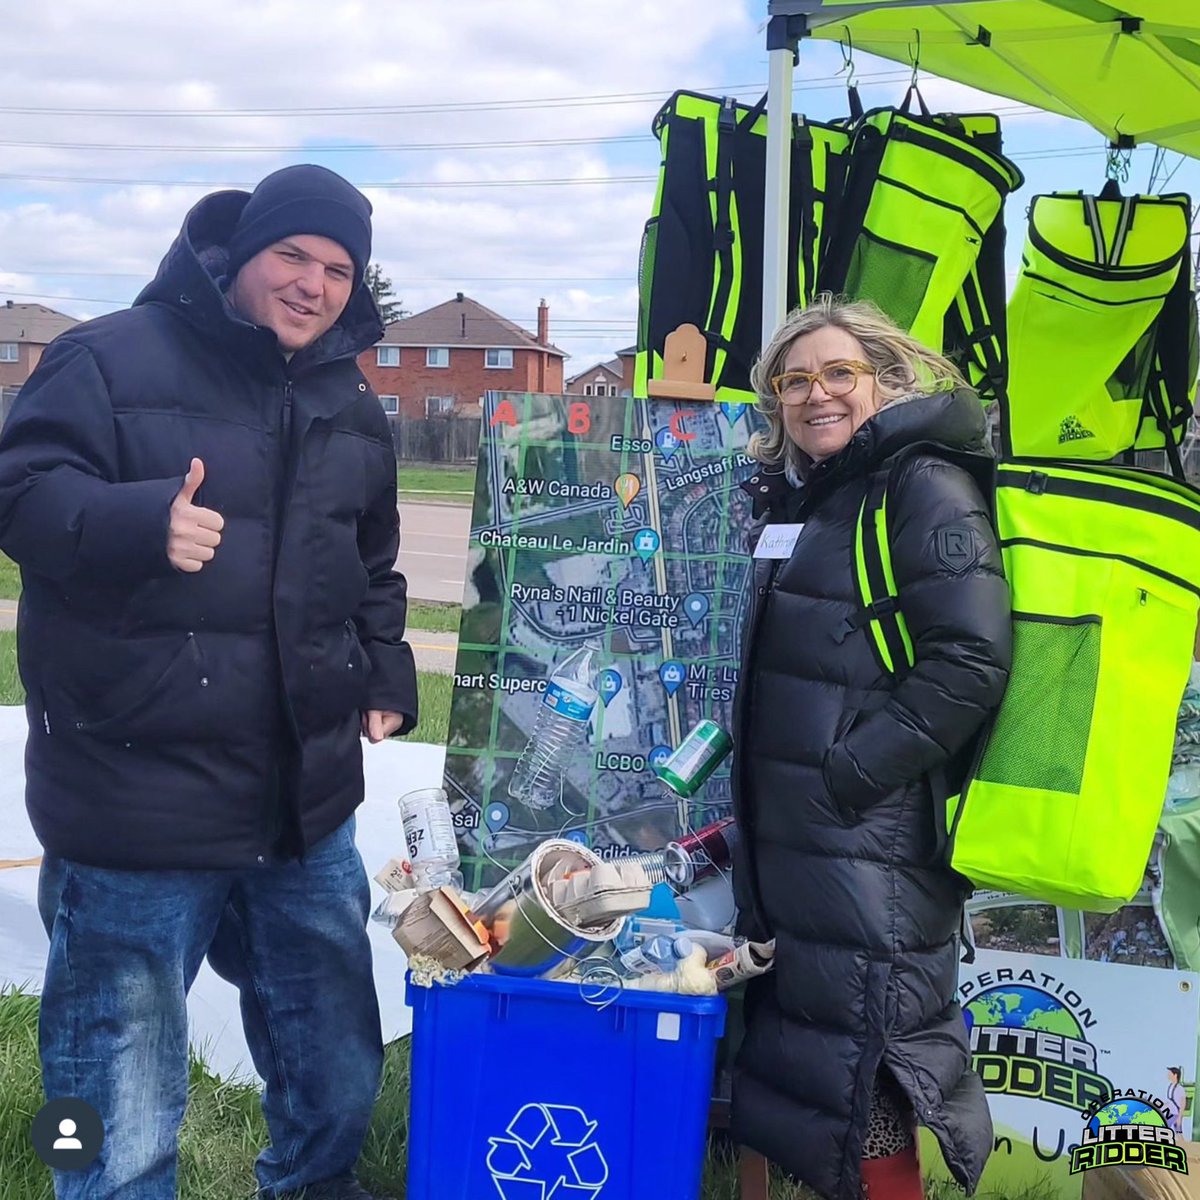 Thank you @adrianovolpentesta for attending our Earth Day clean up event! ☺️ We appreciate the support and an equal passion for litter control 🙌👏 Vaughan is lucky to have you! 

#litterpicking
#littering 
#litterpick 
#littercleanup